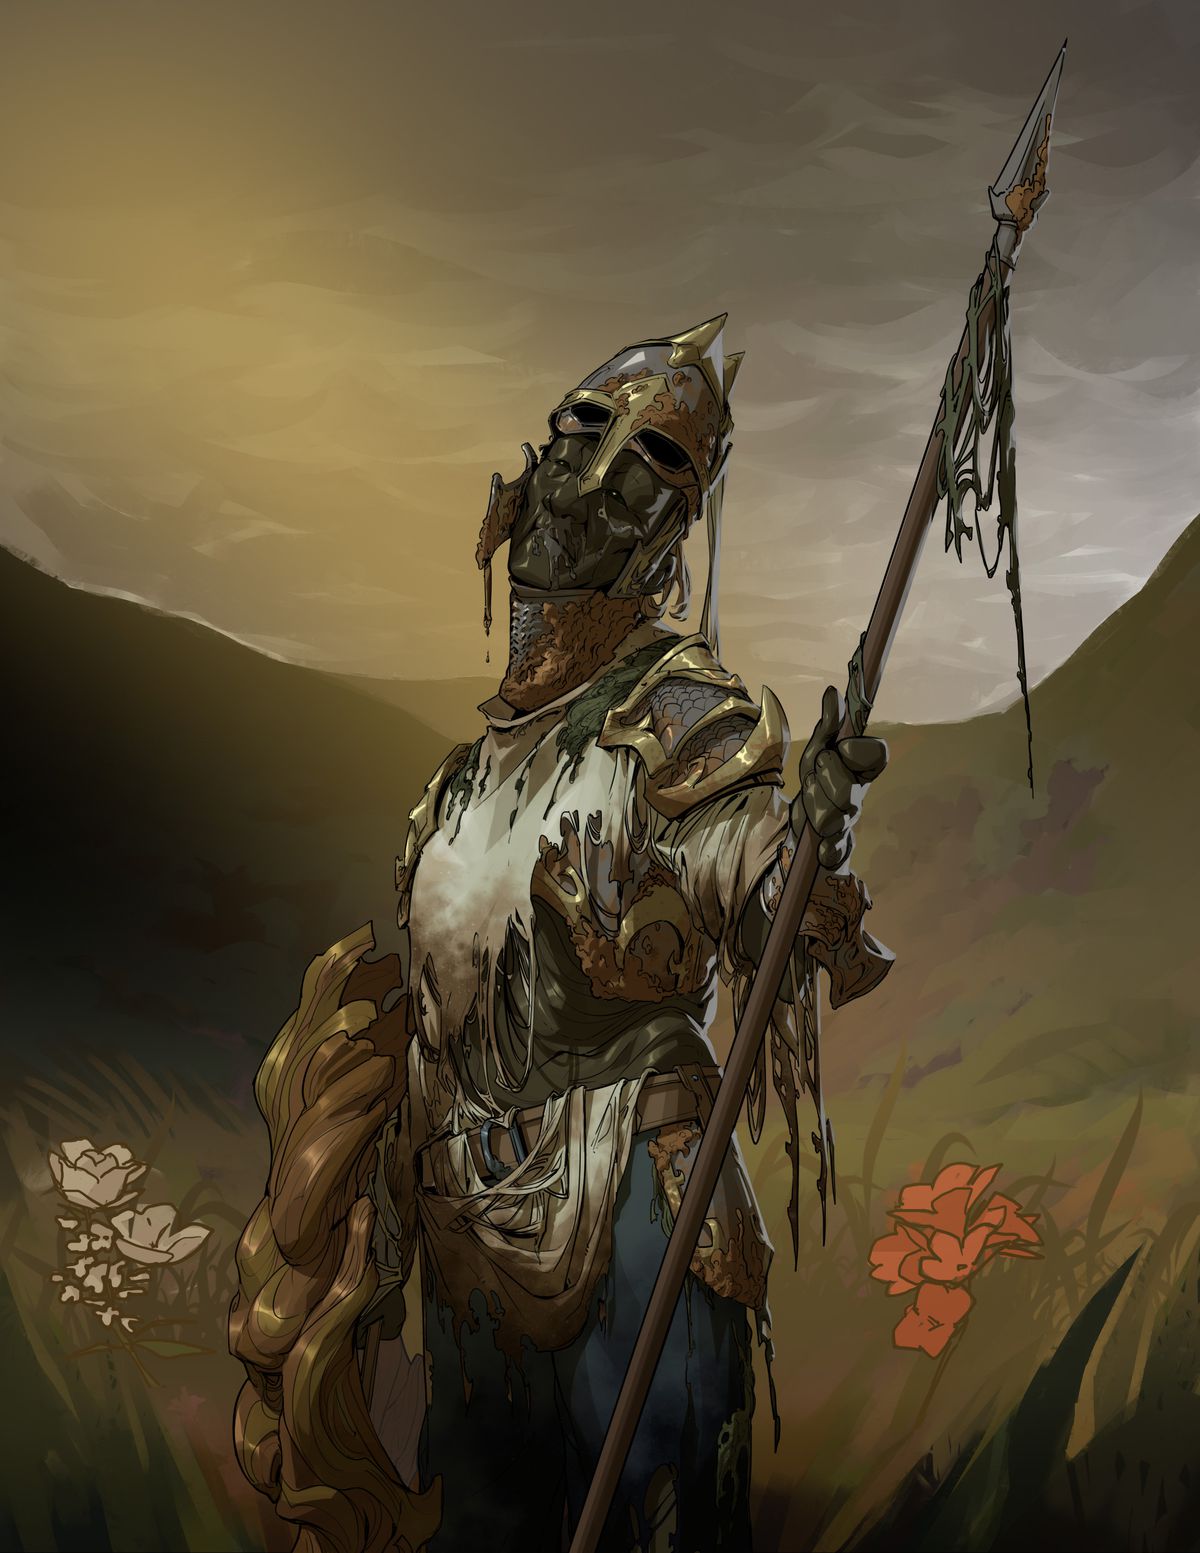 A wet, zombie-like creature wearing ancient arms and armor. It’s standing in a brown swamp with several bright flowers glowing from the mud.